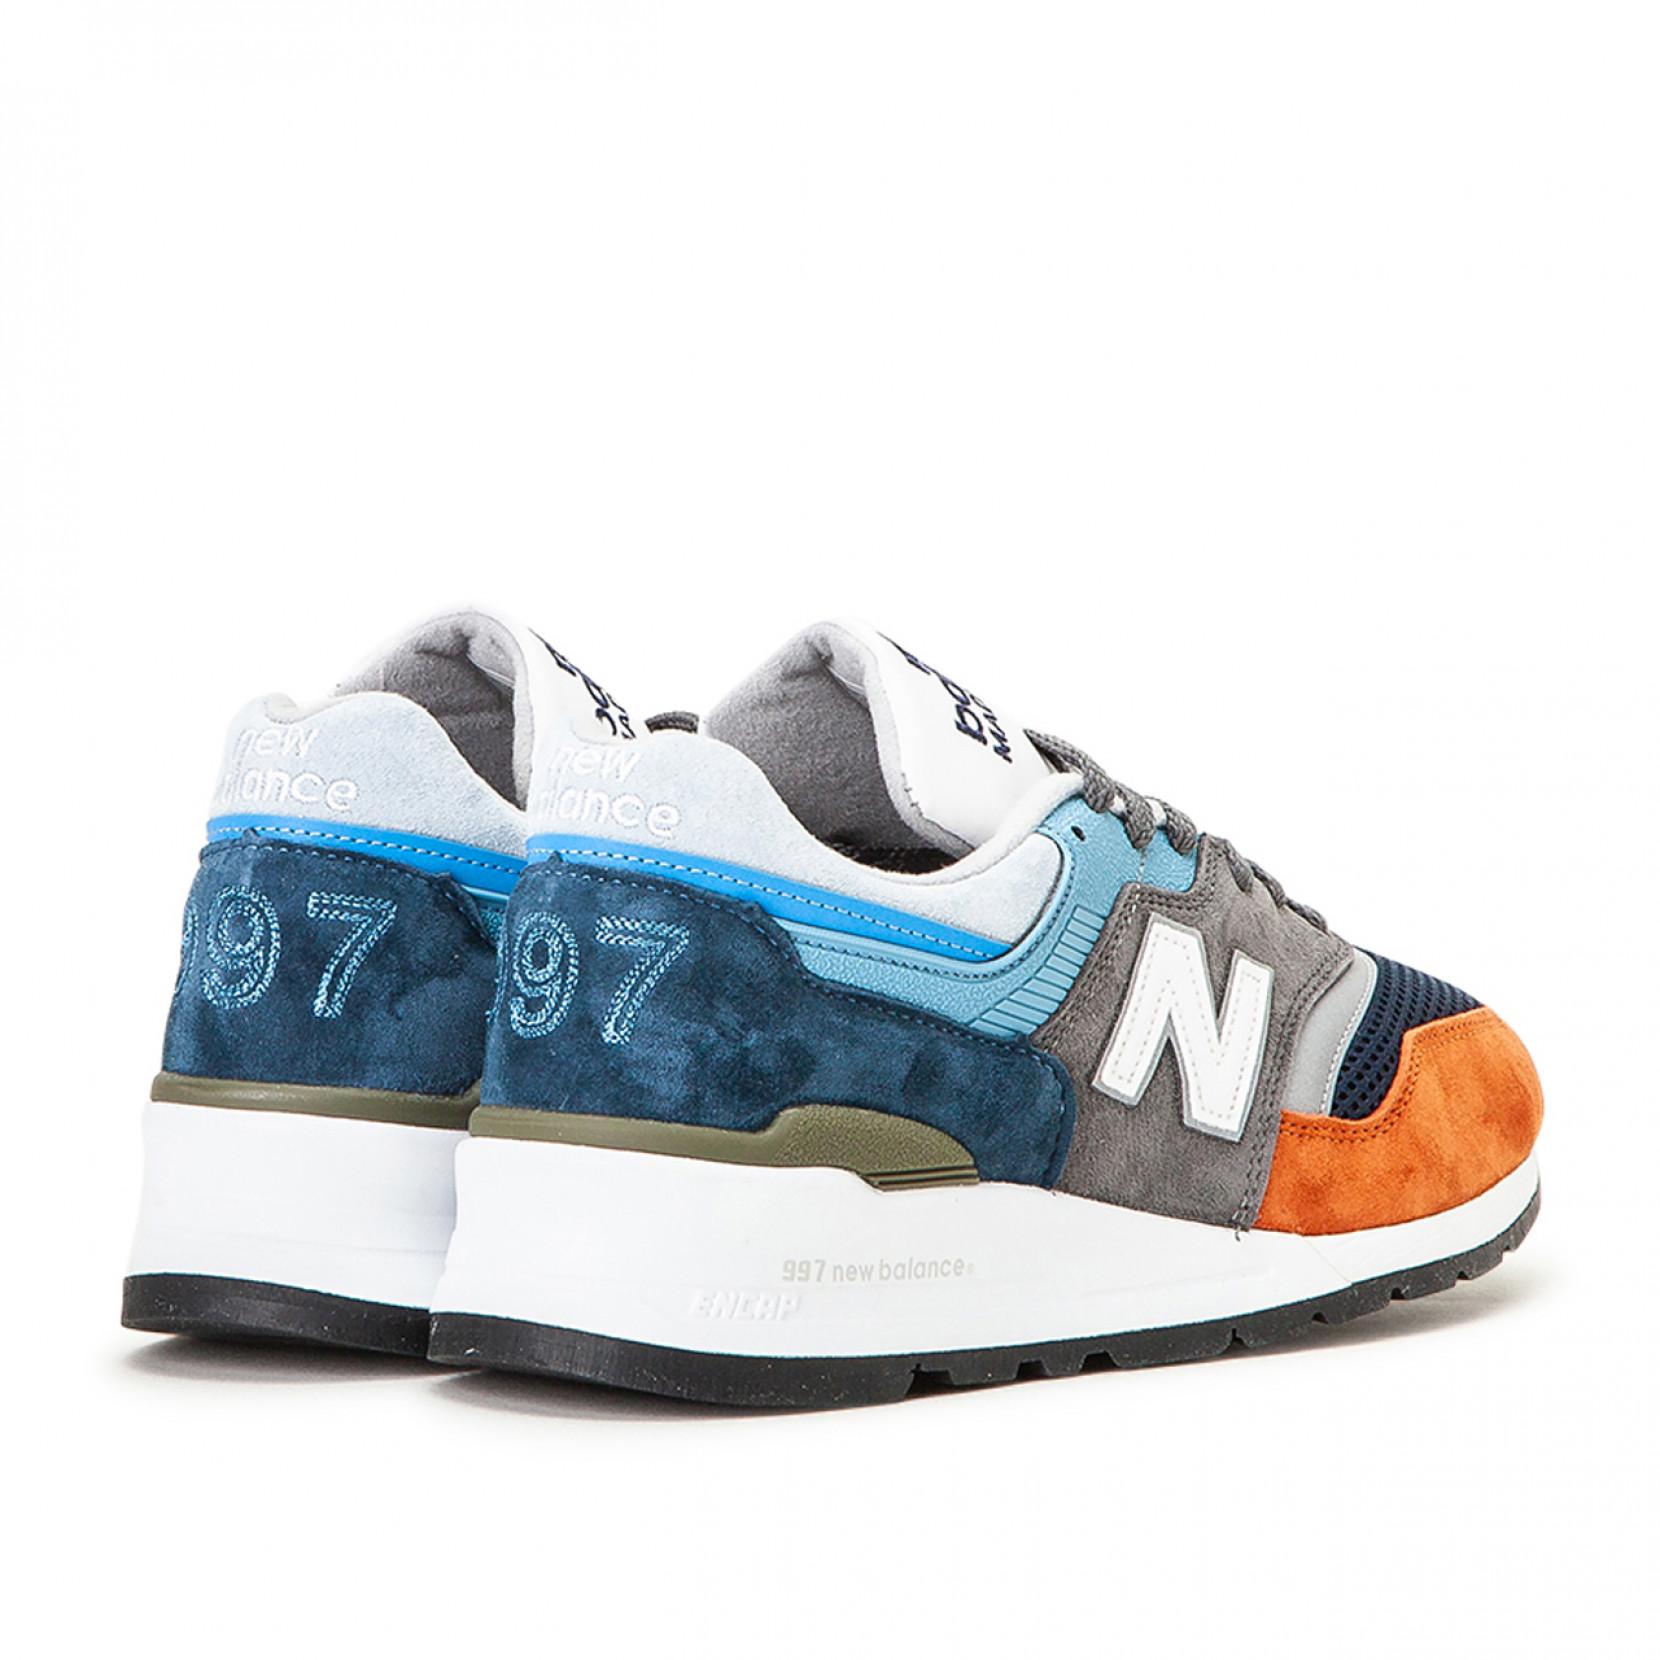 New Balance Suede M997nag - Made In The Usa in Blue for Men - Lyst